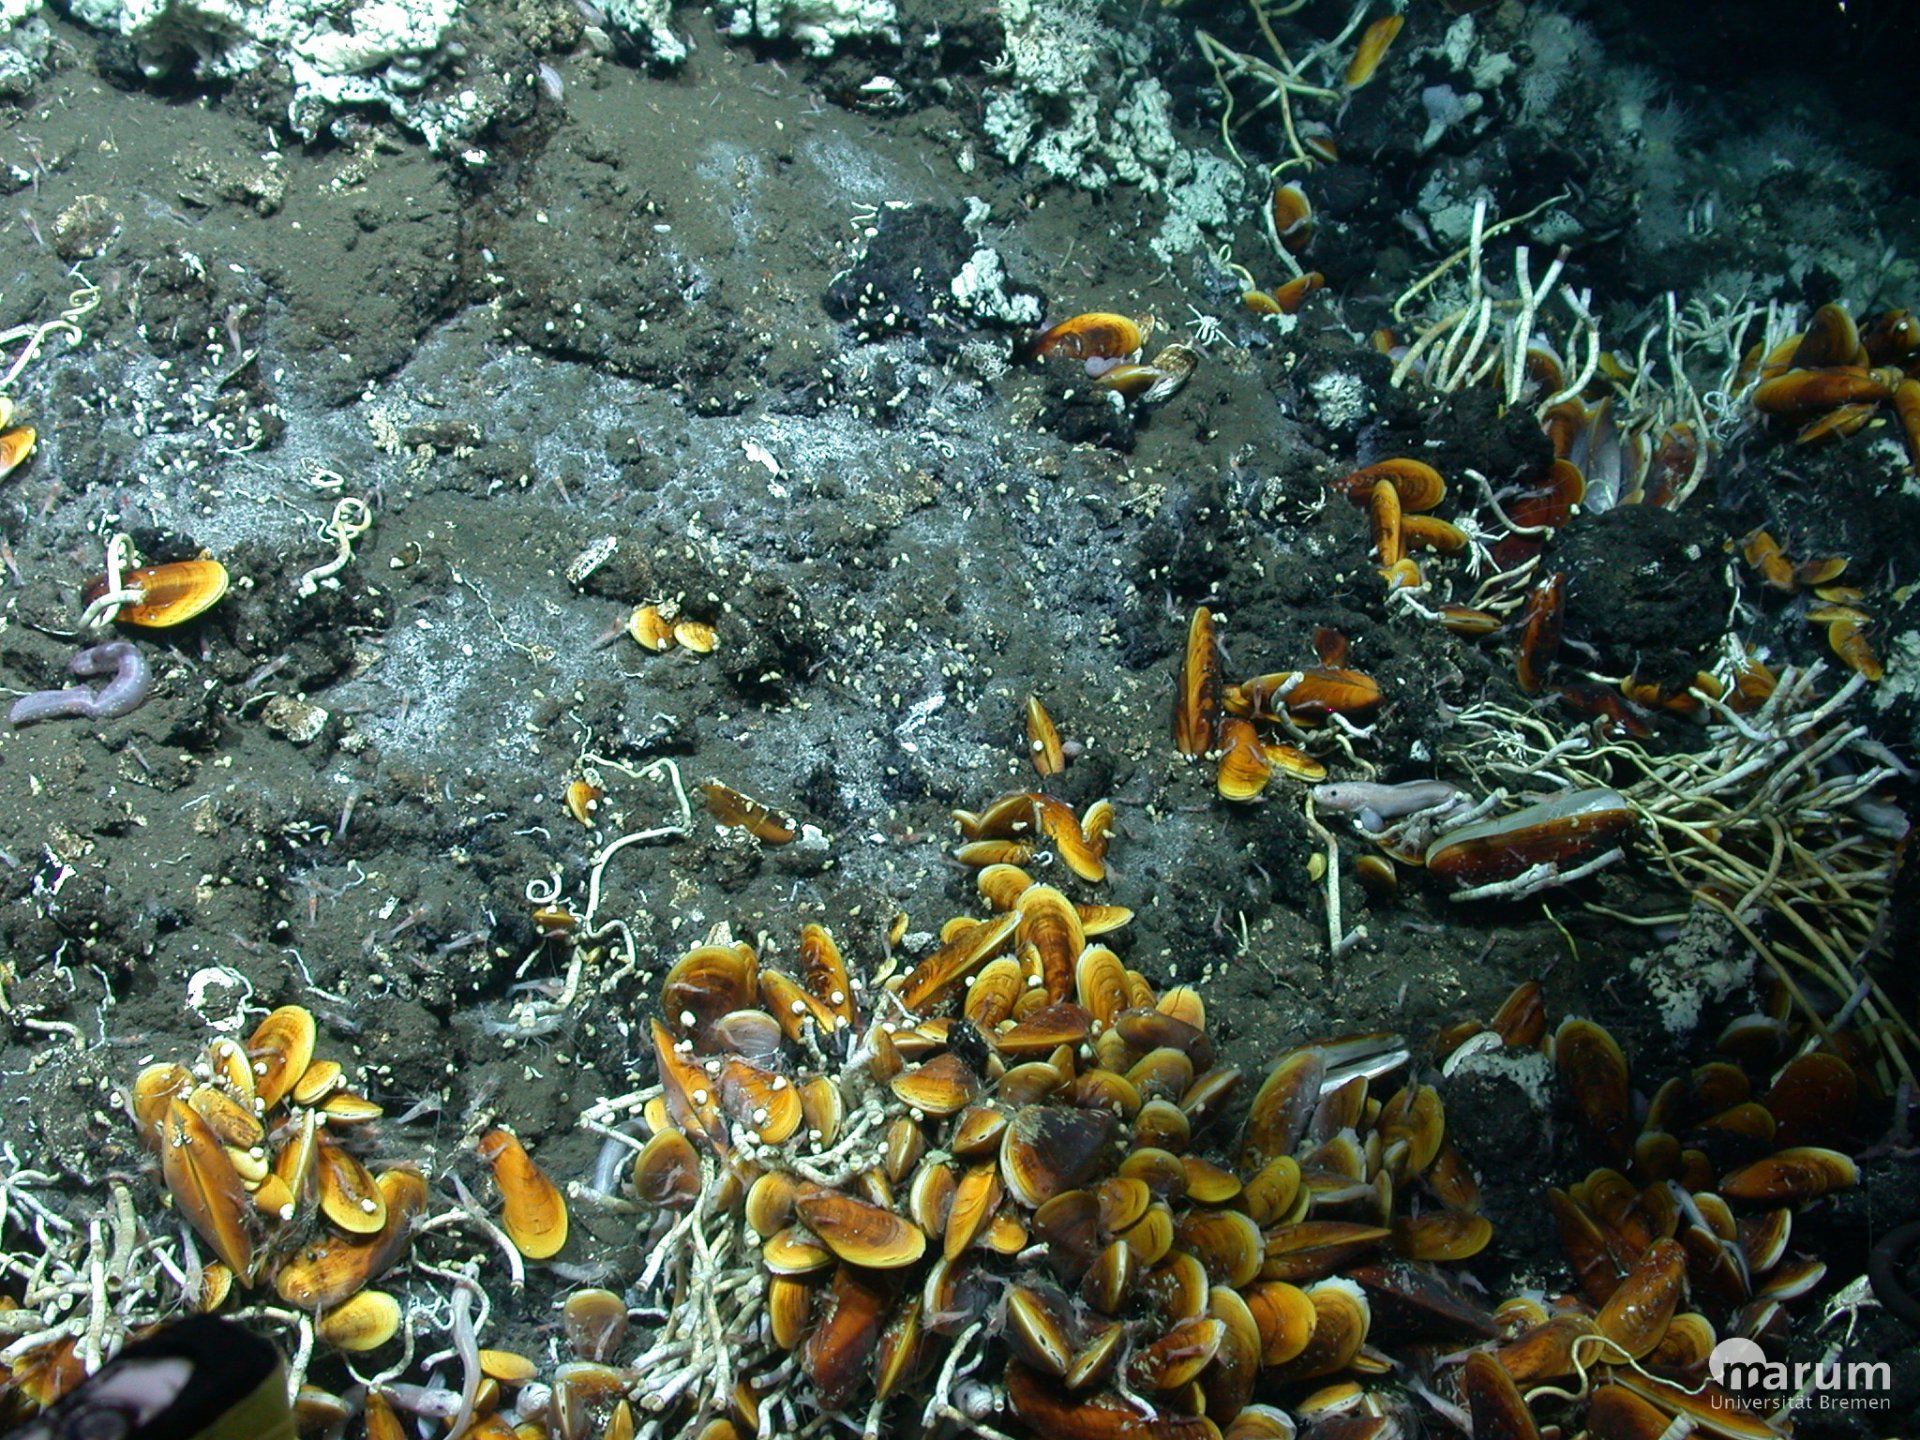 Mussels at an oil spill in the Gulf of Mexico (© MARUM – Centre for Marine Environmental Sciences)